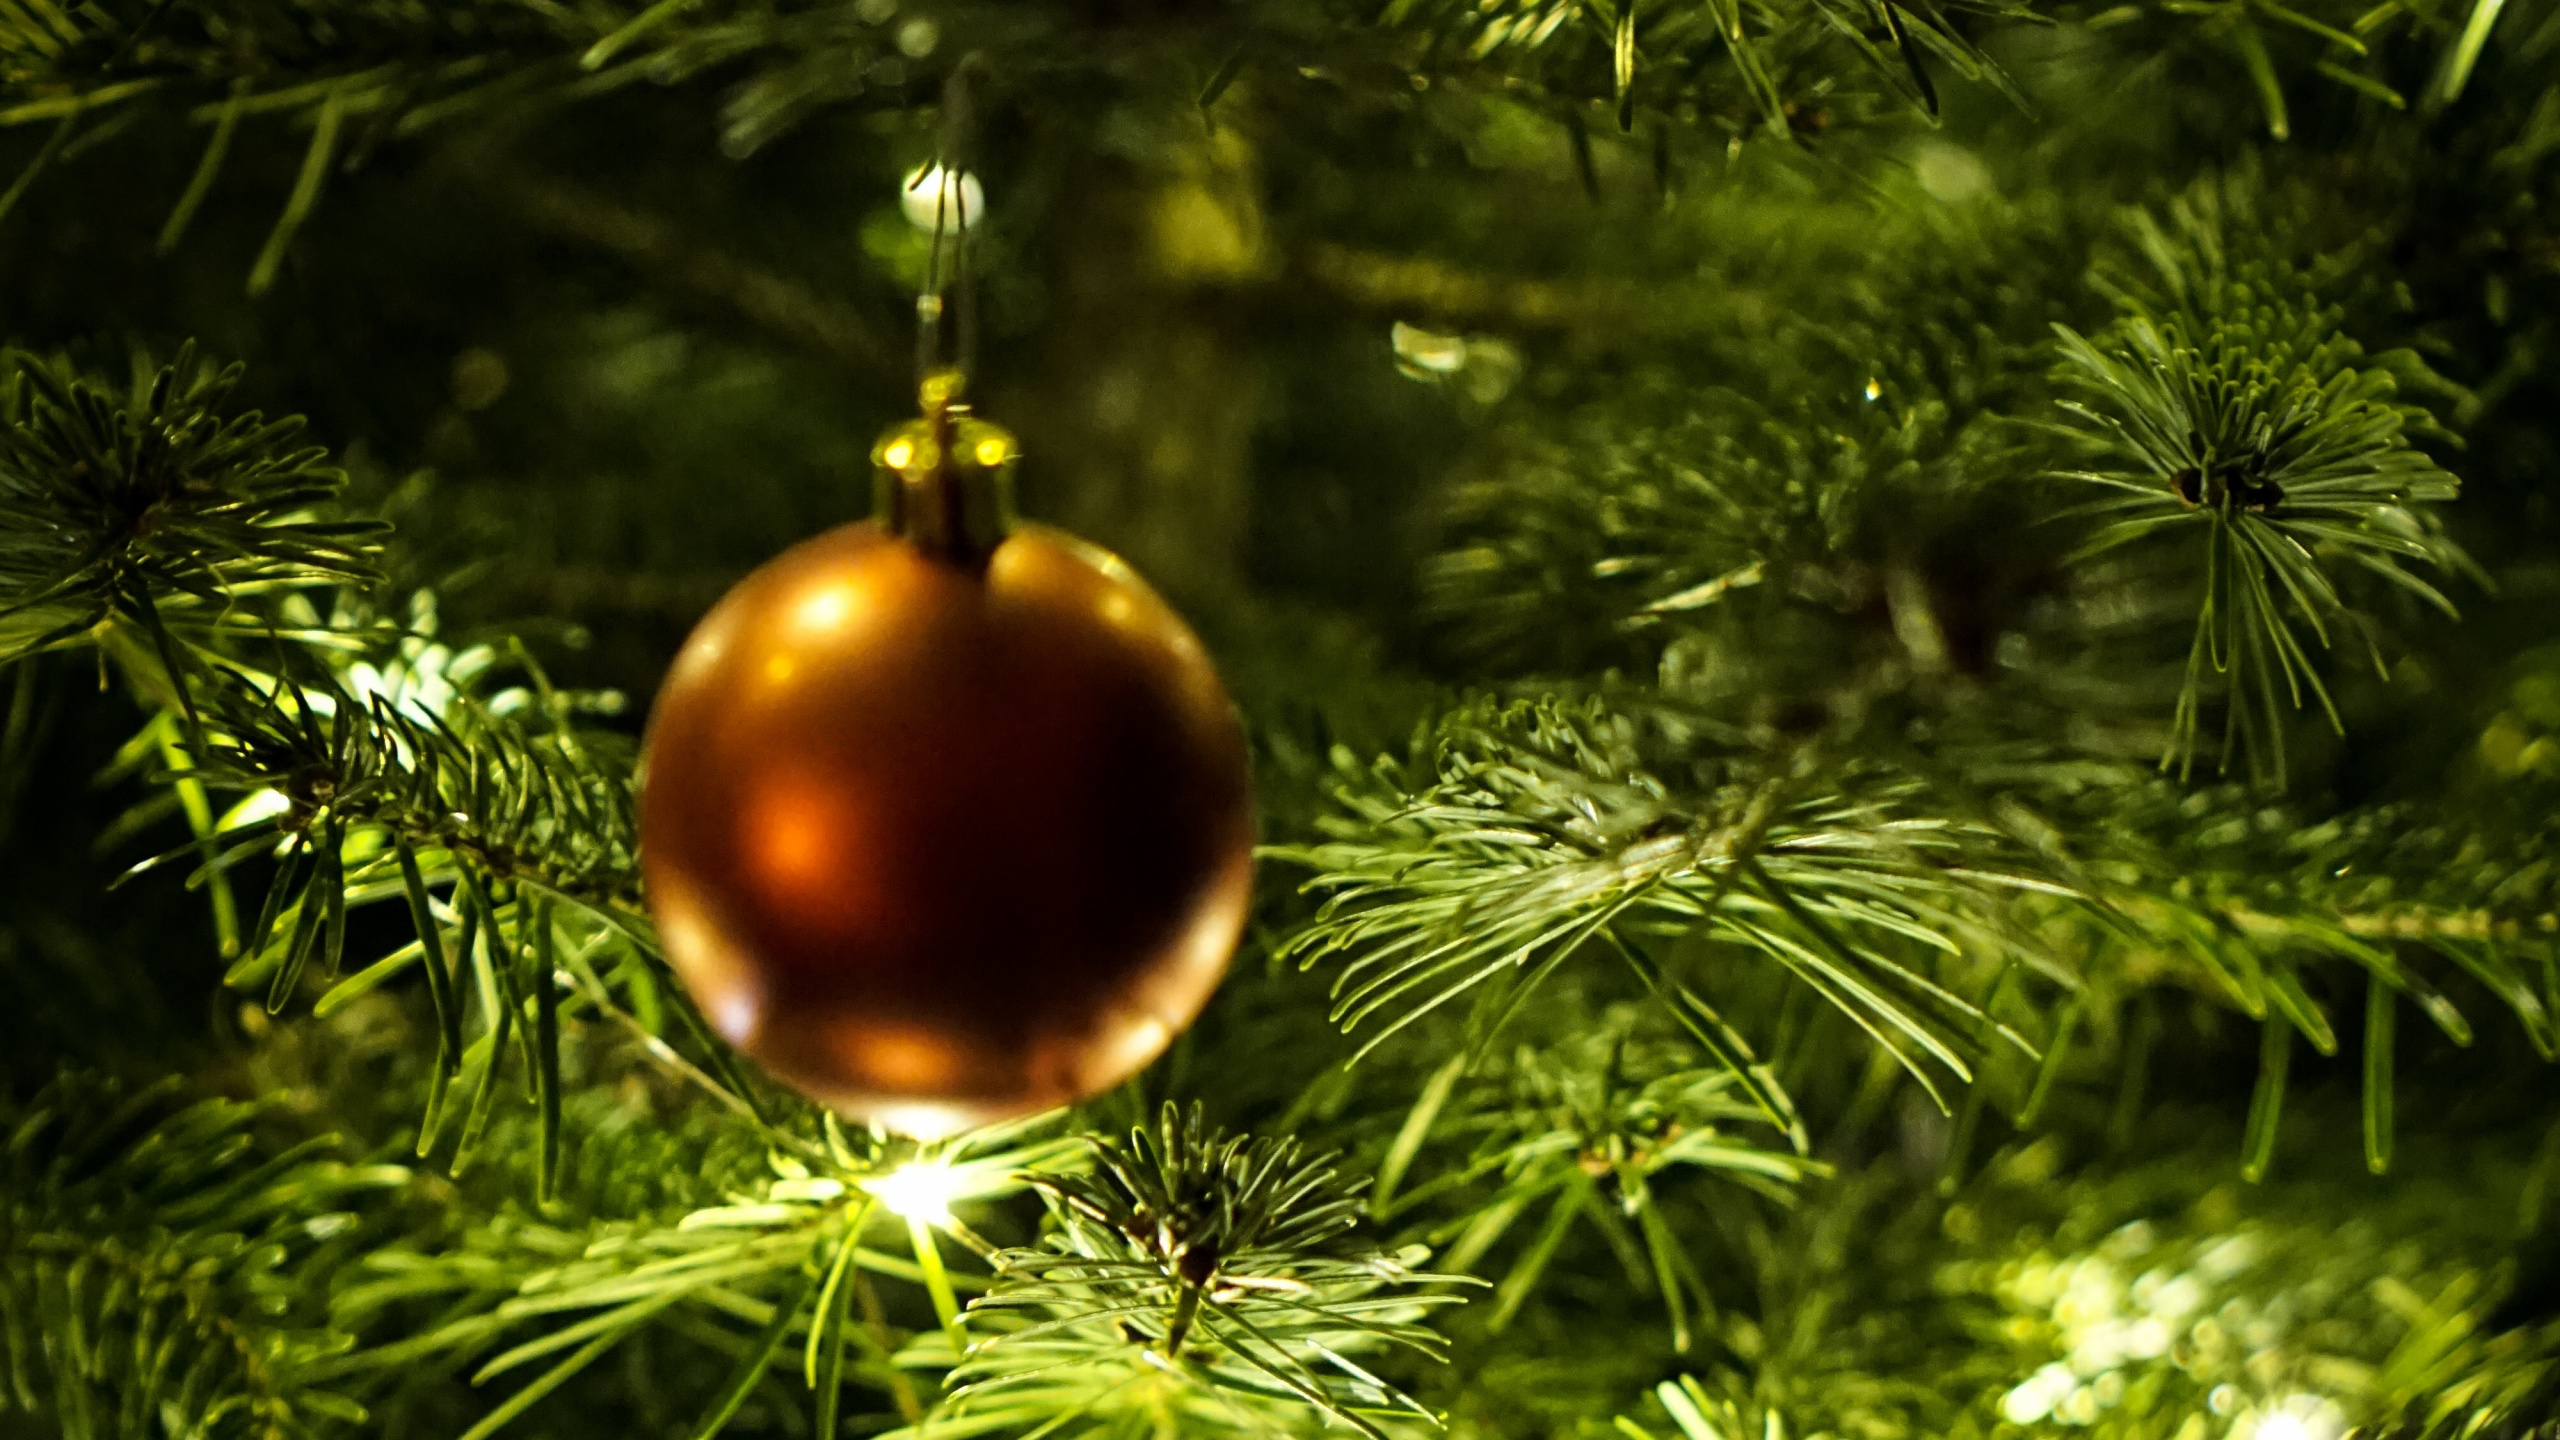 New Year, Christmas Day, Christmas Ornament, Christmas Decoration, Christmas Tree. Wallpaper in 2560x1440 Resolution